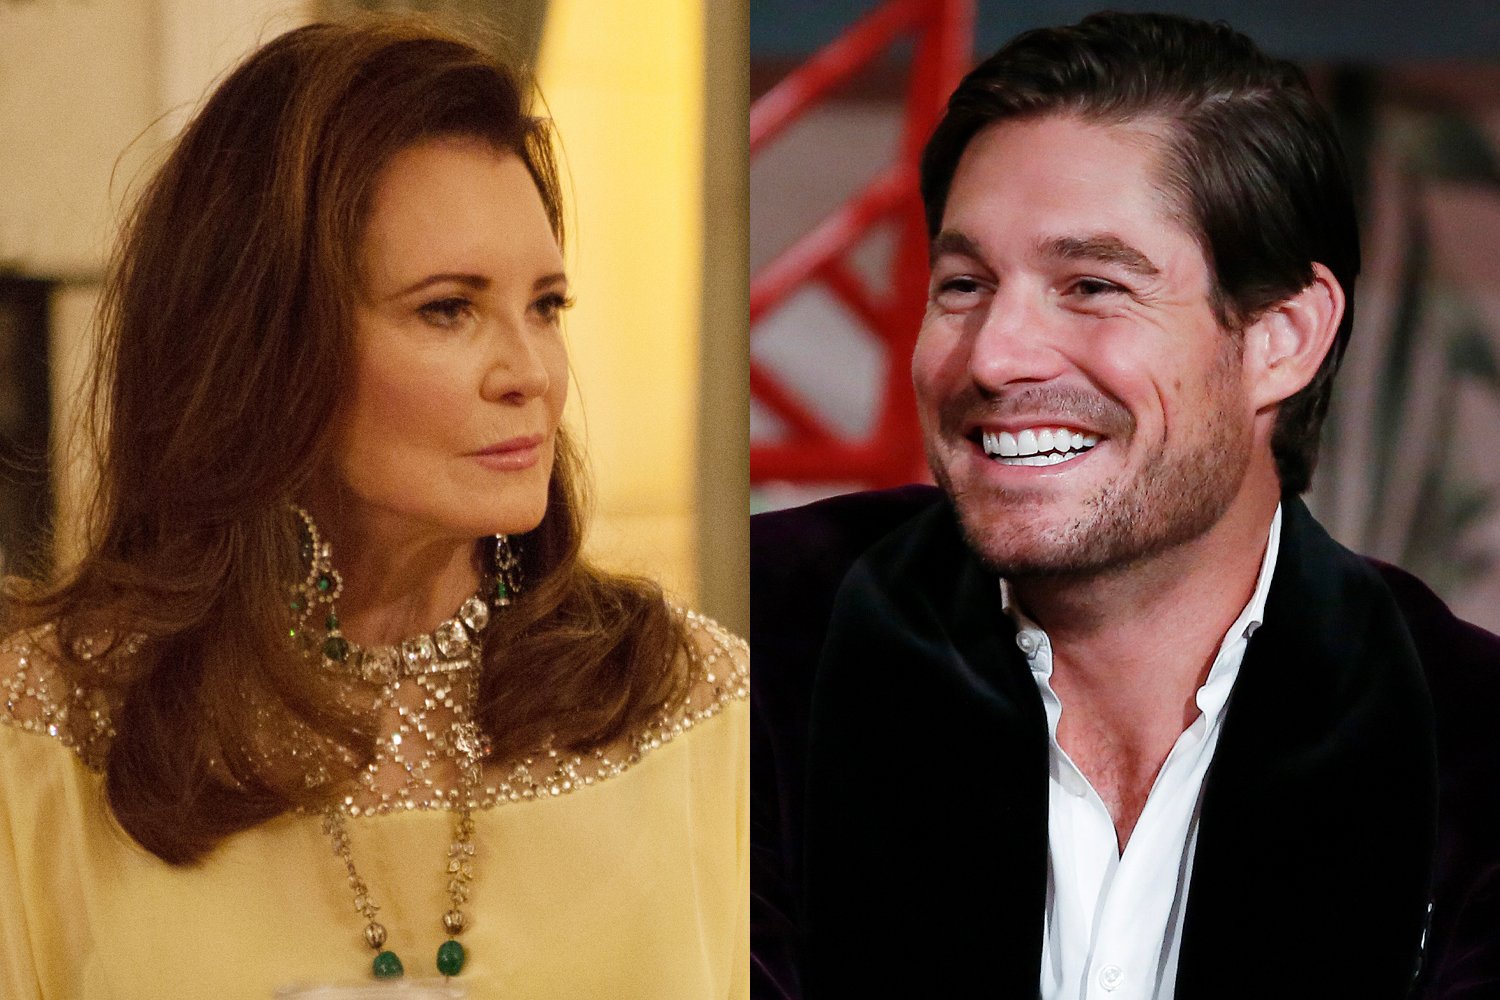 ‘Southern Charm’: Craig Conover Calls Patricia Altschul’s Pillows a ‘Failure of a Company’